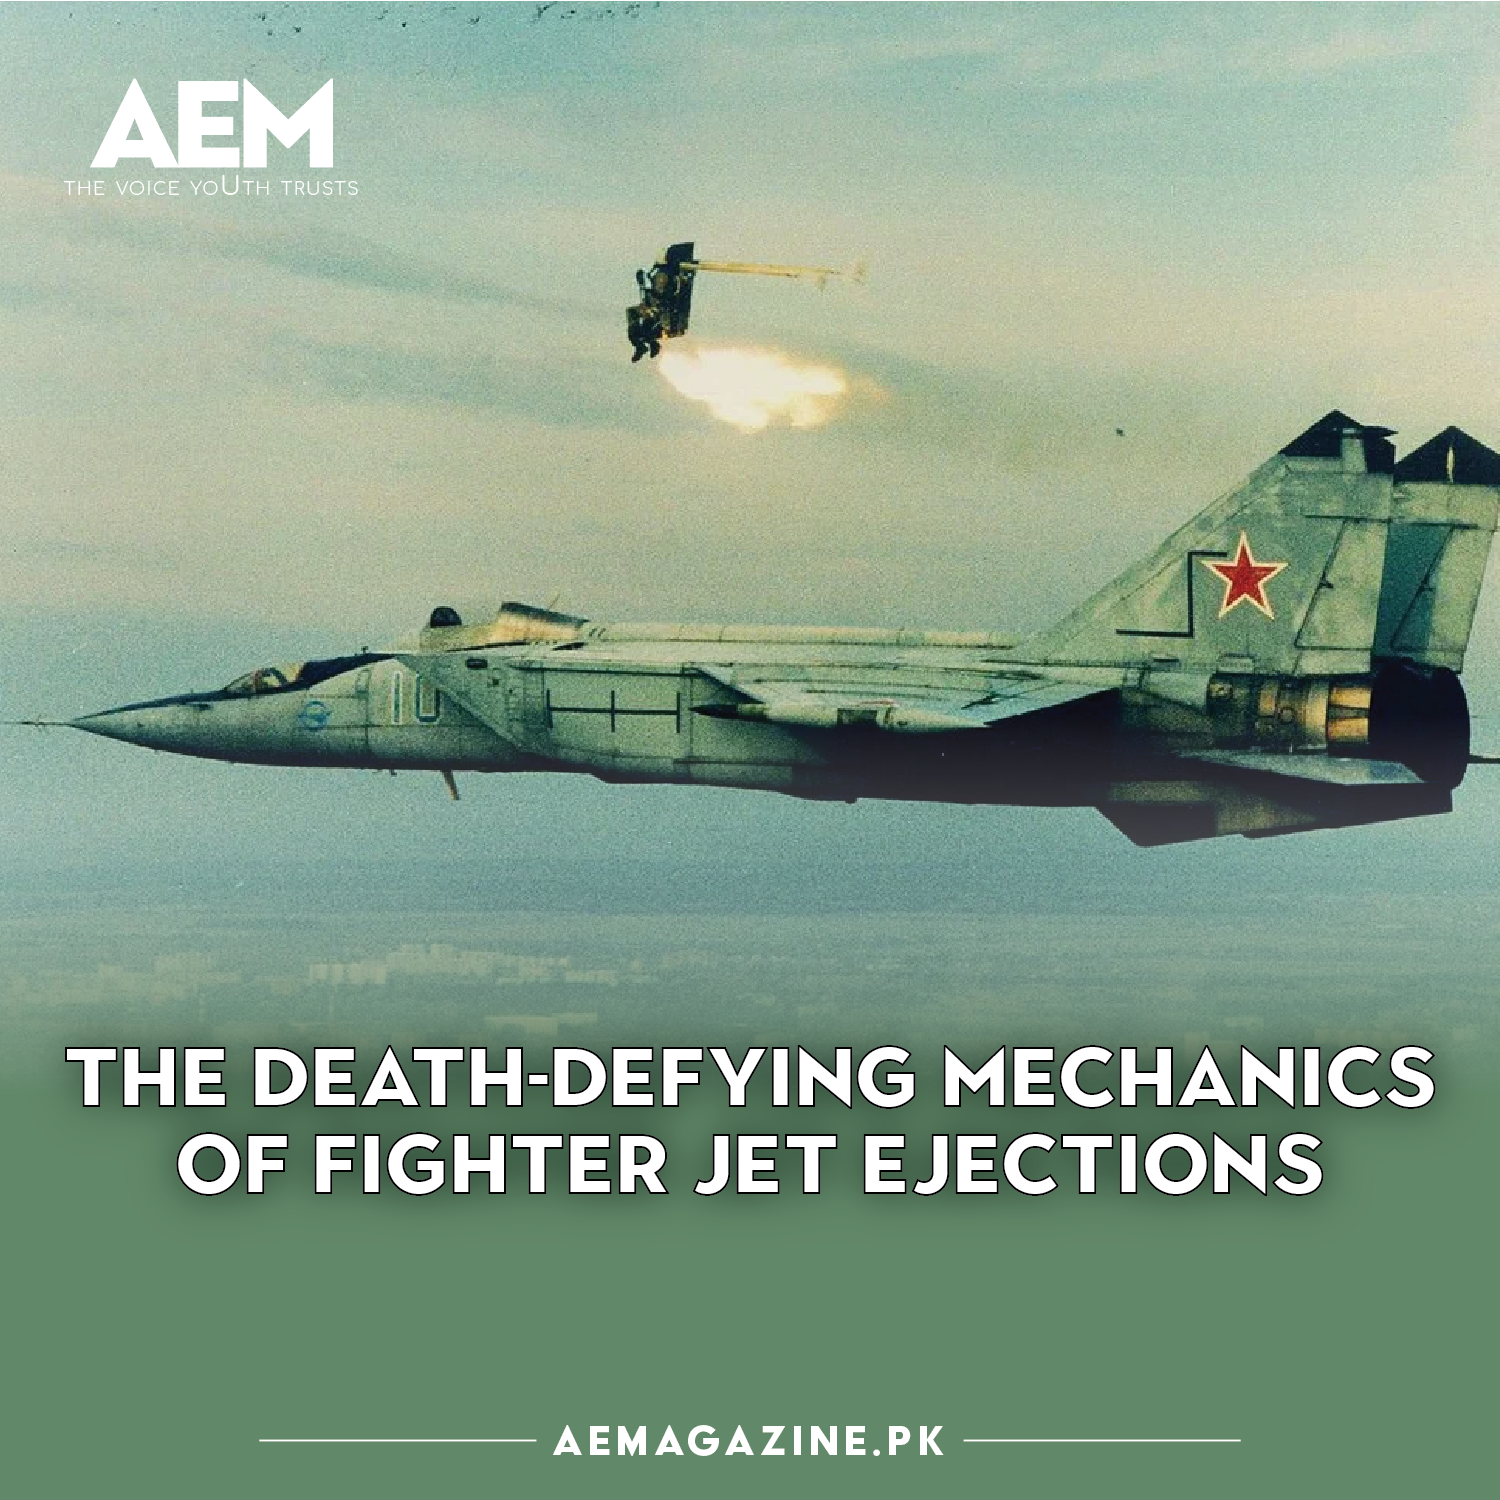 The Death-Defying Mechanics Of Fighter Jet Ejections